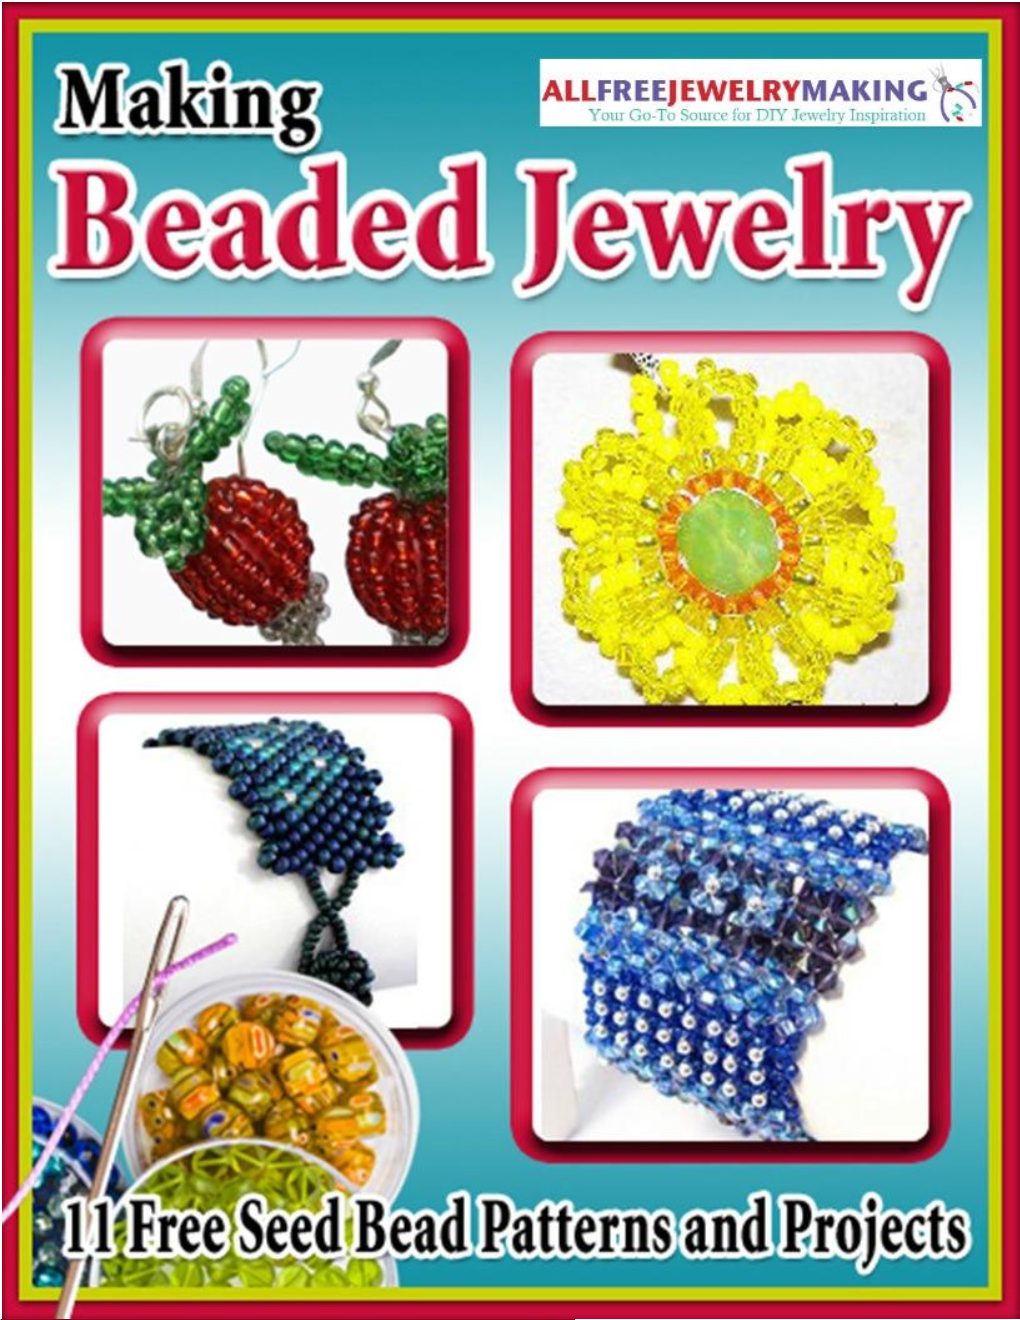 Making Beaded Jewelry 11 Free Seed Bead Patterns and Projects Ebook